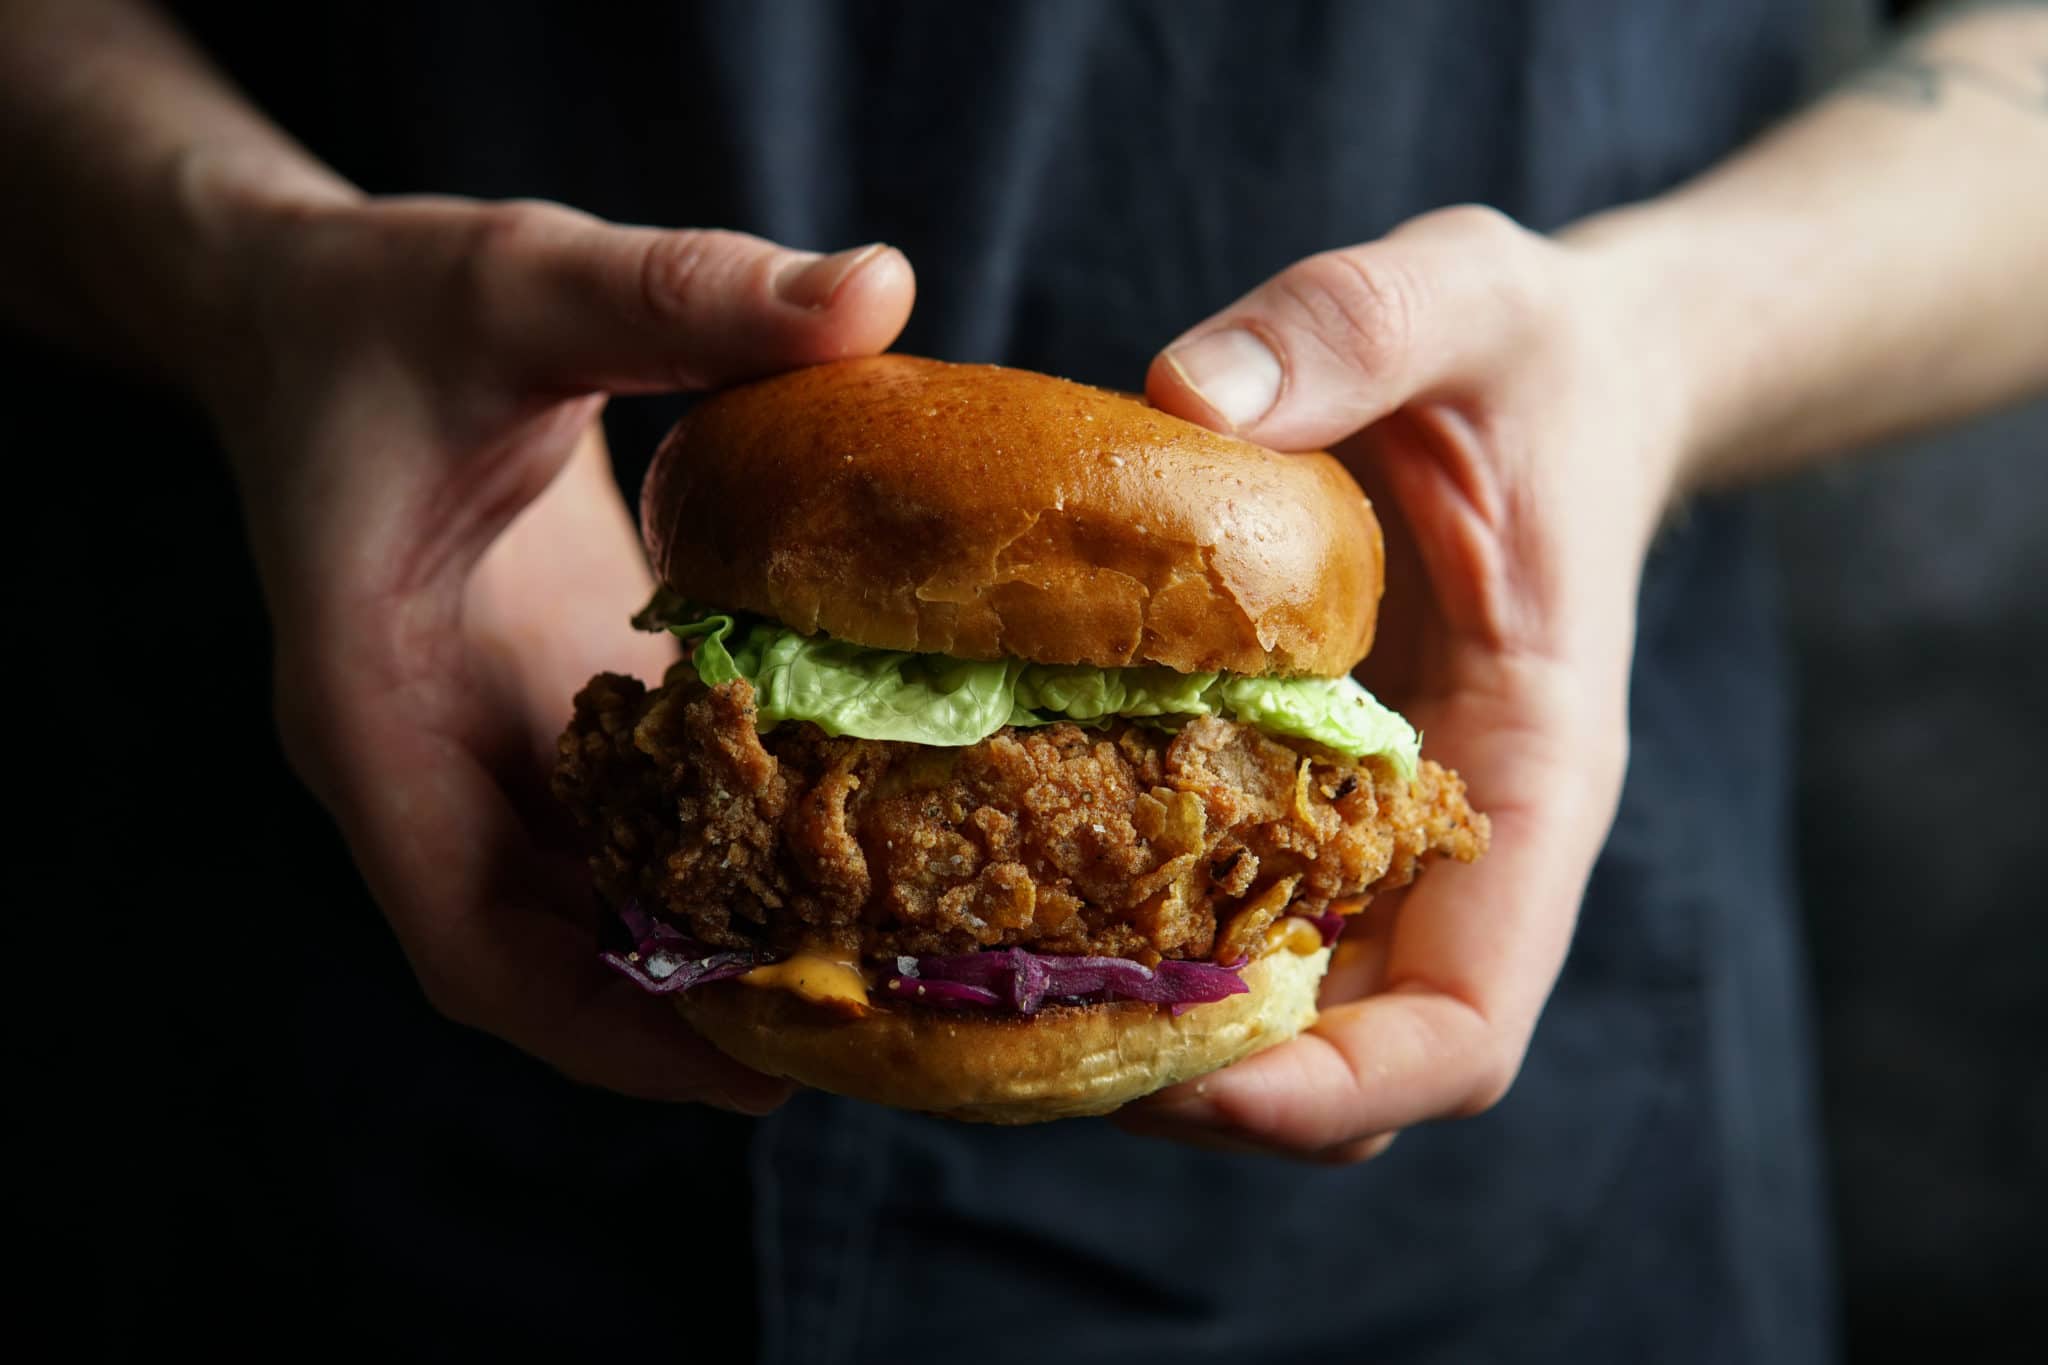 Hands holding a Southern fried fish burger with lettuce and red cabbage slaw.